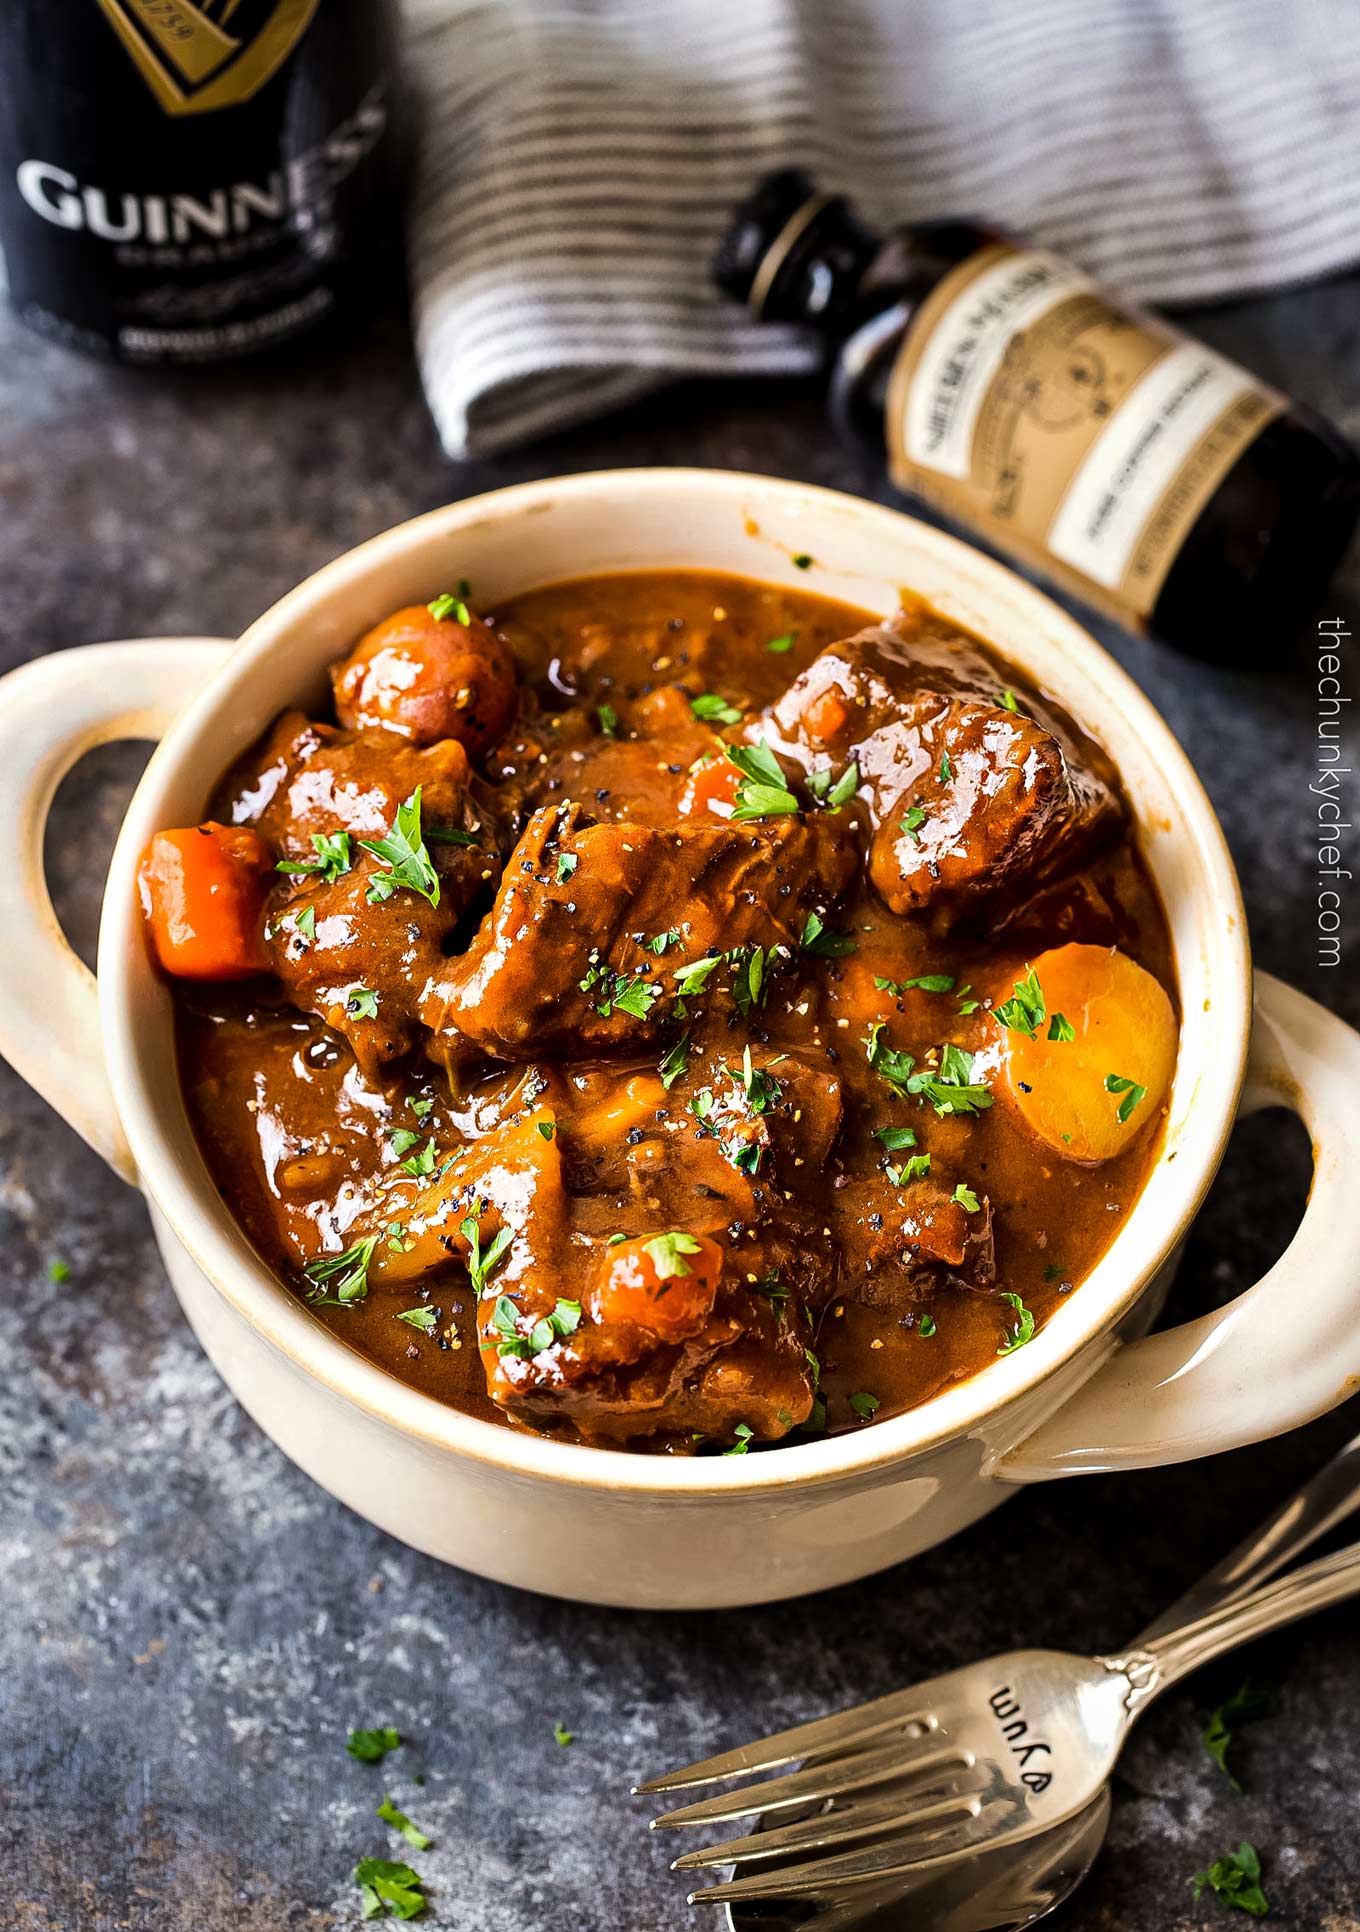 Guinness Beef Stew (Irish stew reicipe) - The Chunky Chef